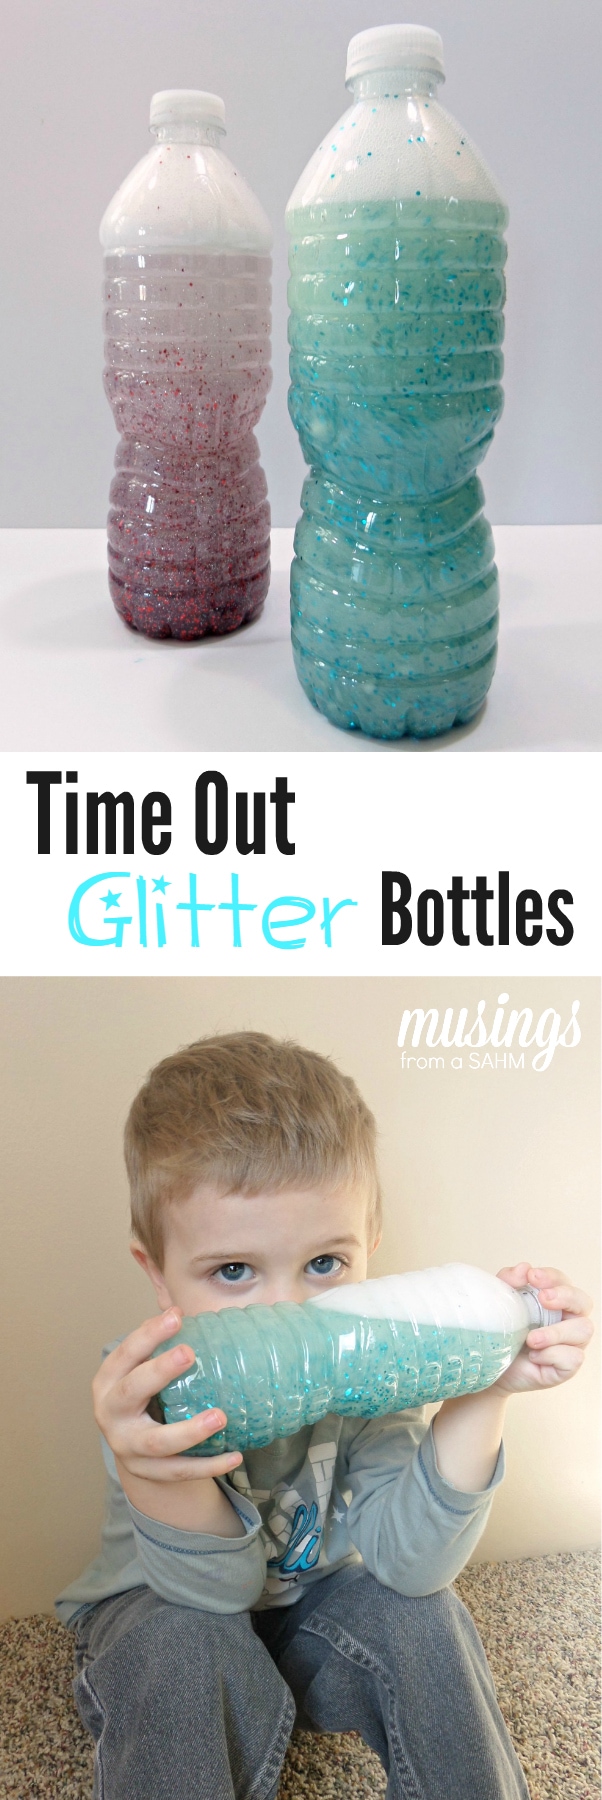 DIY Time Out Glitter Bottles are so easy to make, you can make one for each child with their favorite colors. Plus they’re great for quiet time too!